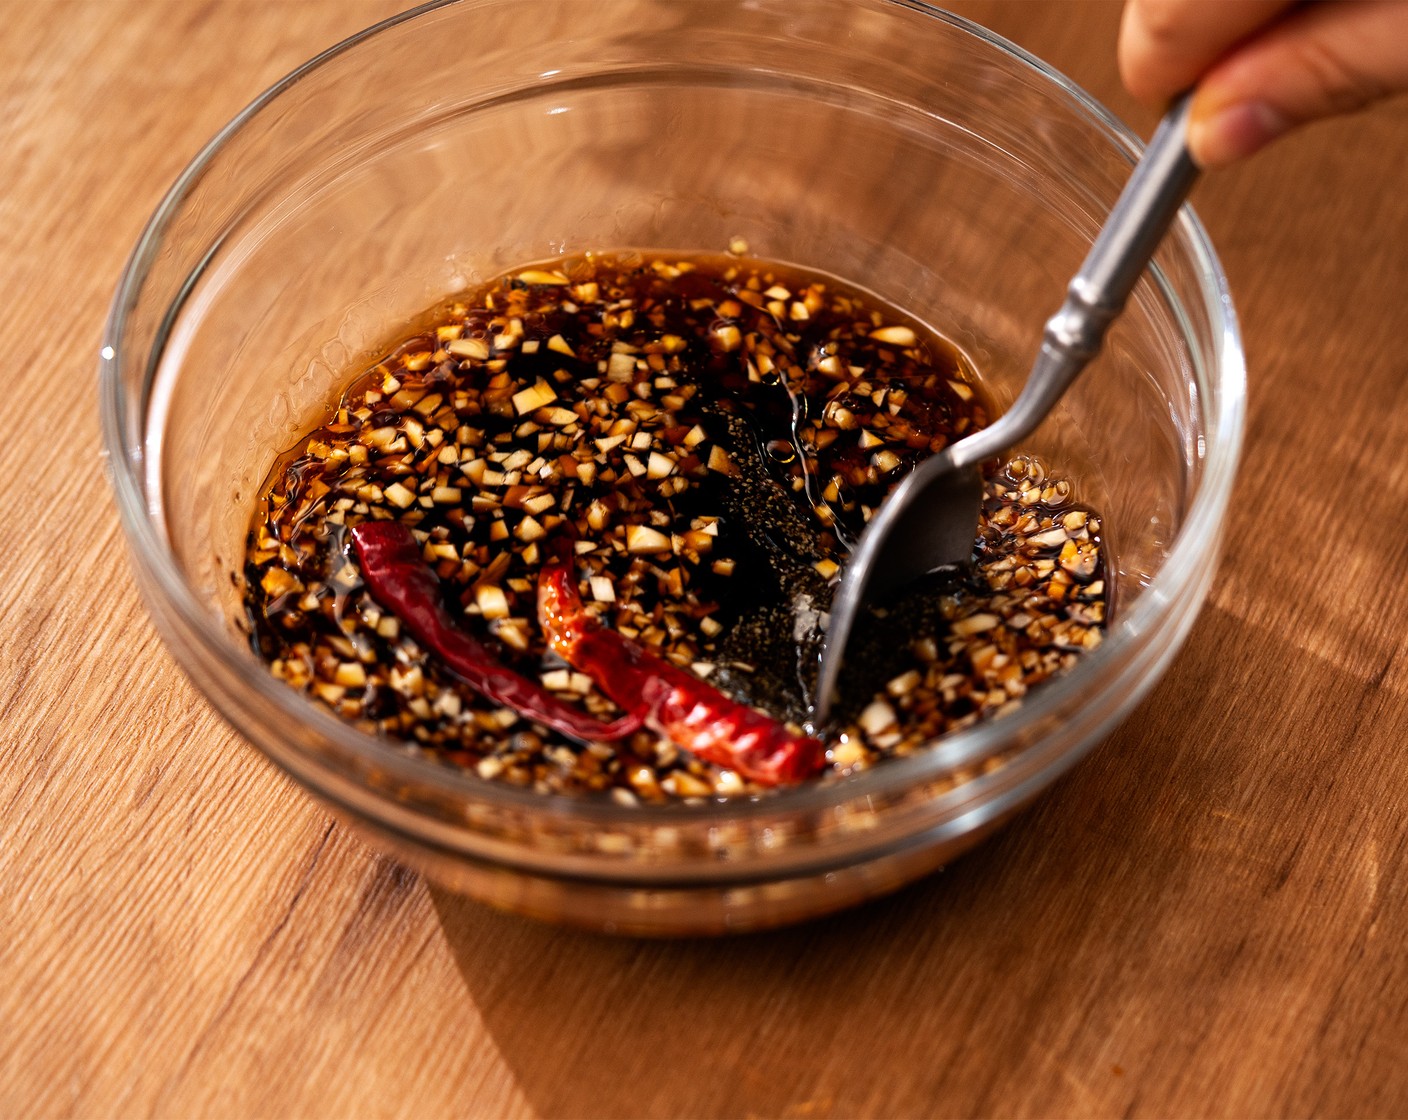 step 2 In a medium mixing bowl, add Soy Sauce (1/2 cup), Brown Sugar (3 Tbsp), Mirin (1/4 cup), Garlic (1/4 cup), Fresh Ginger (1 tsp), Sesame Oil (1 Tbsp), Ground Black Pepper (1 tsp), and Dried Chili Peppers (2). Mix all the ingredients until well combined, and set aside.